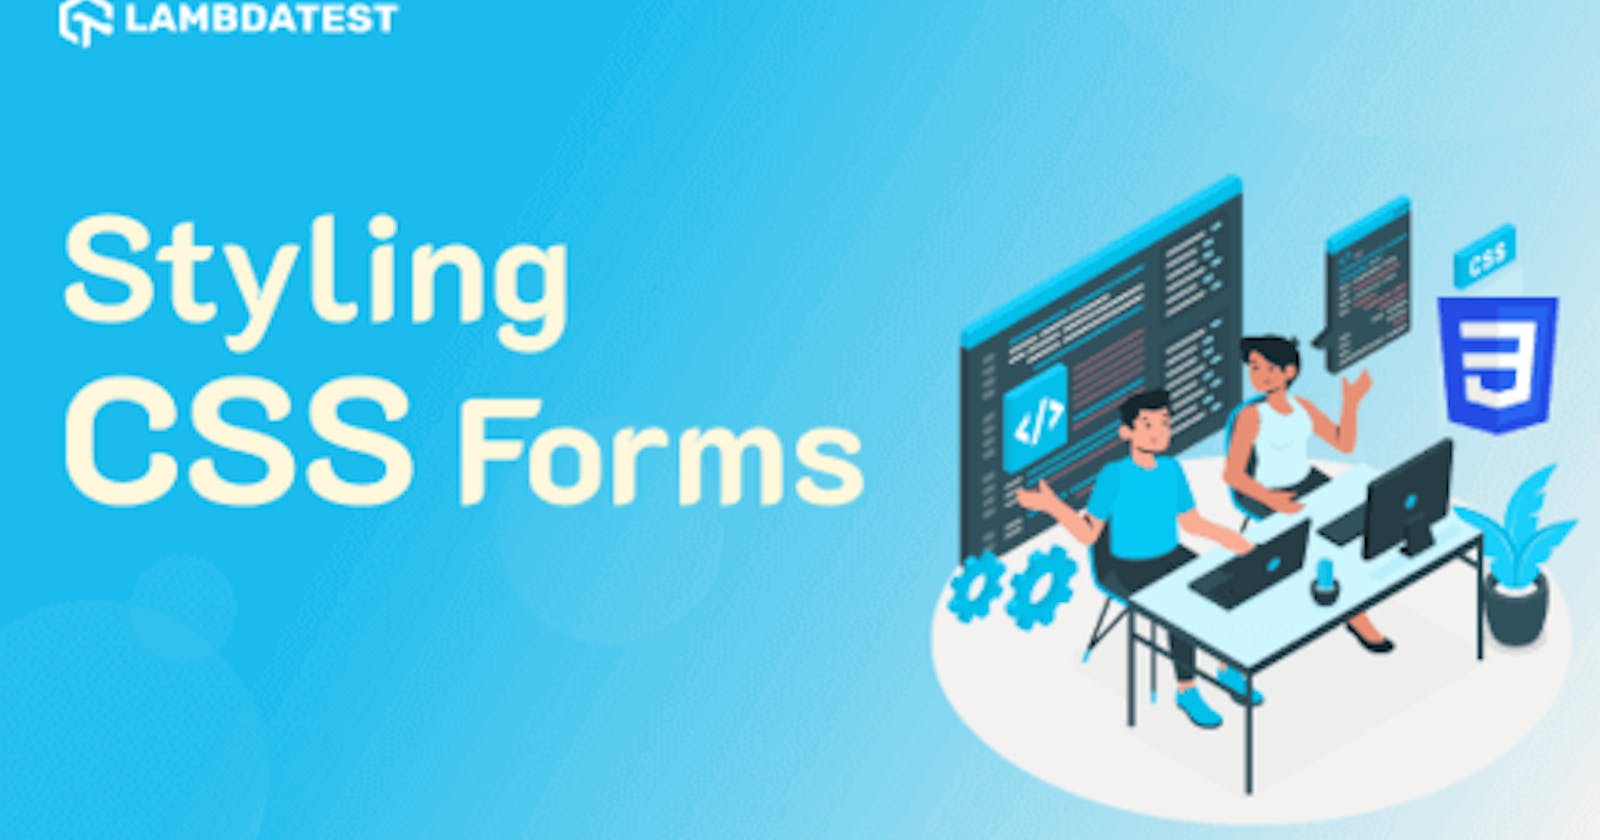 A Beginner’s Guide To Styling CSS Forms